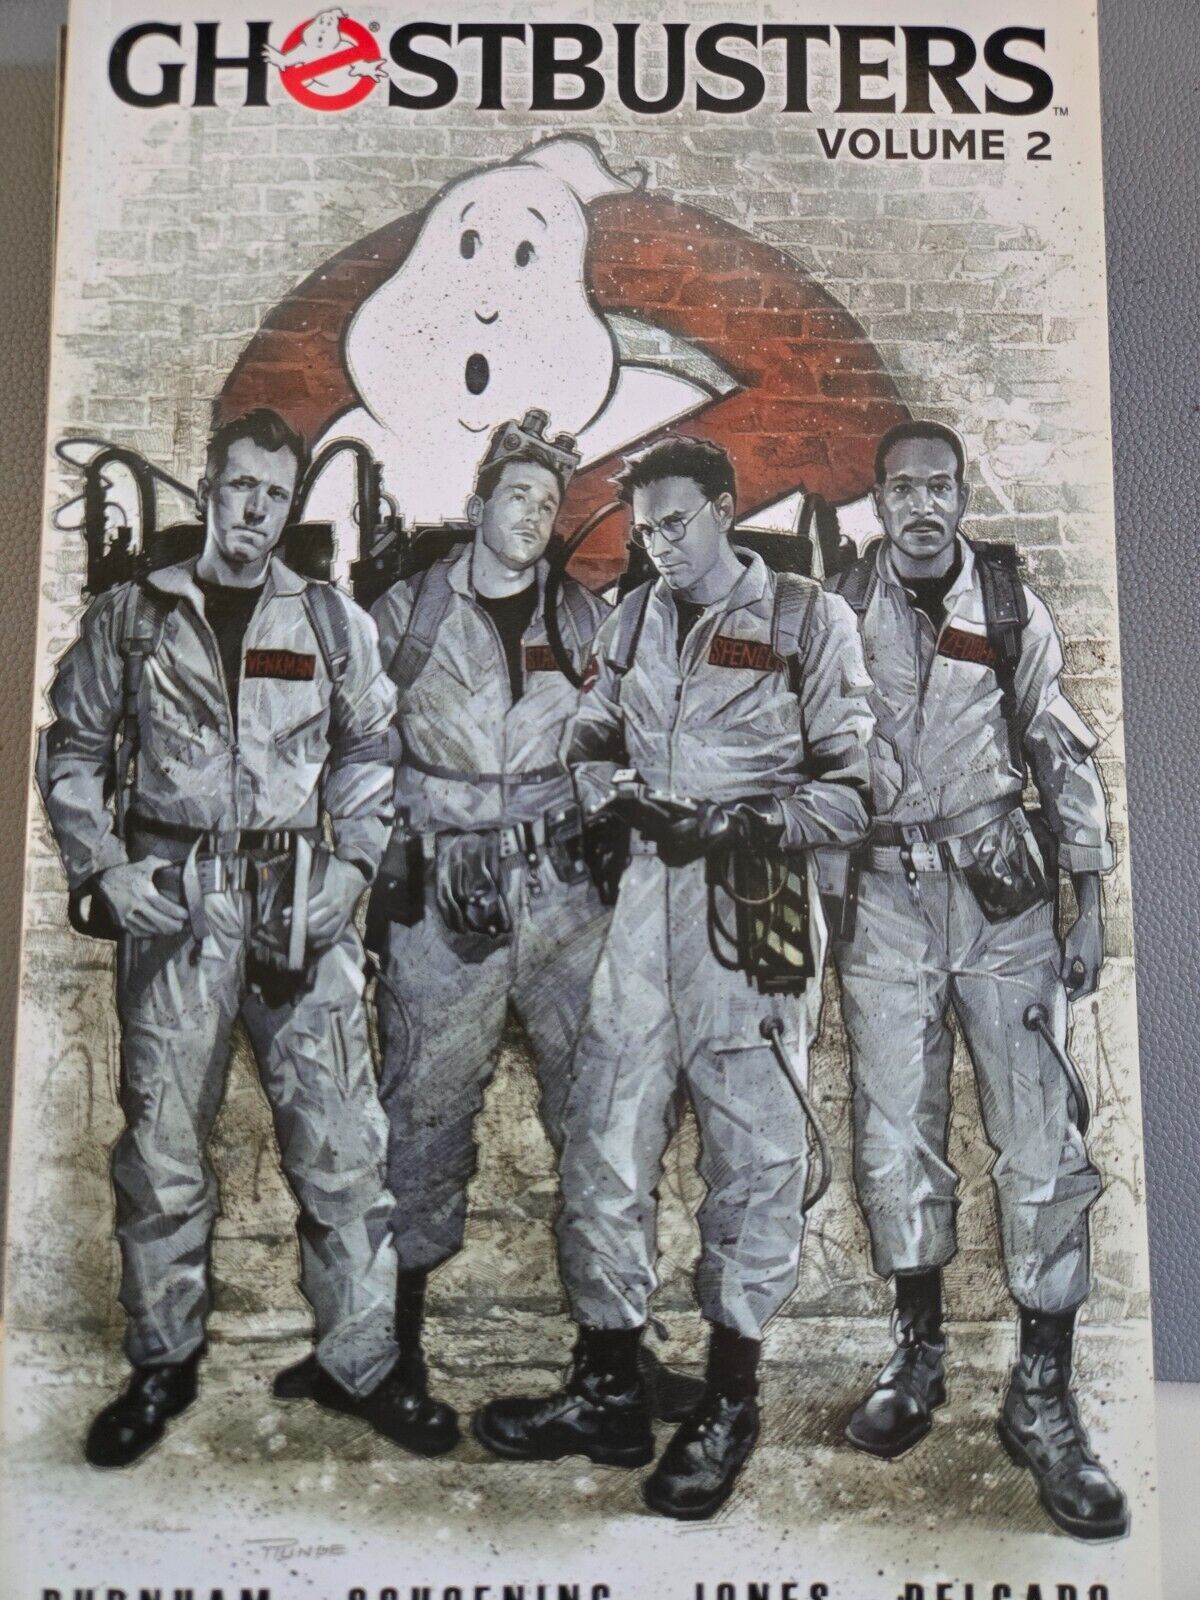 The Ghostbusters Comics Vol 1-4